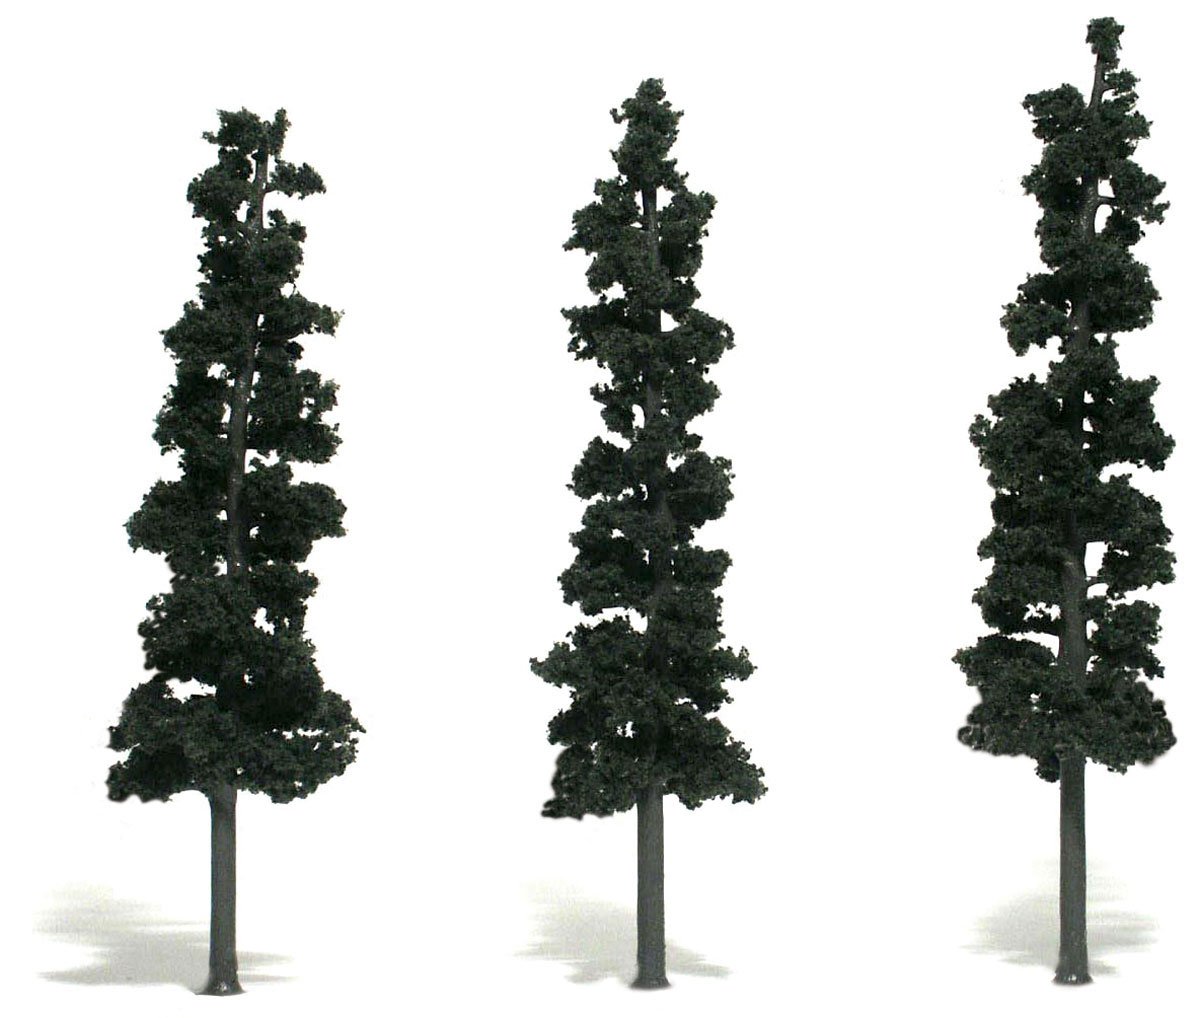 Woodland Scenics Ready Made Trees Conifer Colors O Gauge Pine 12 PK 6-8" Wds1582 for sale online 